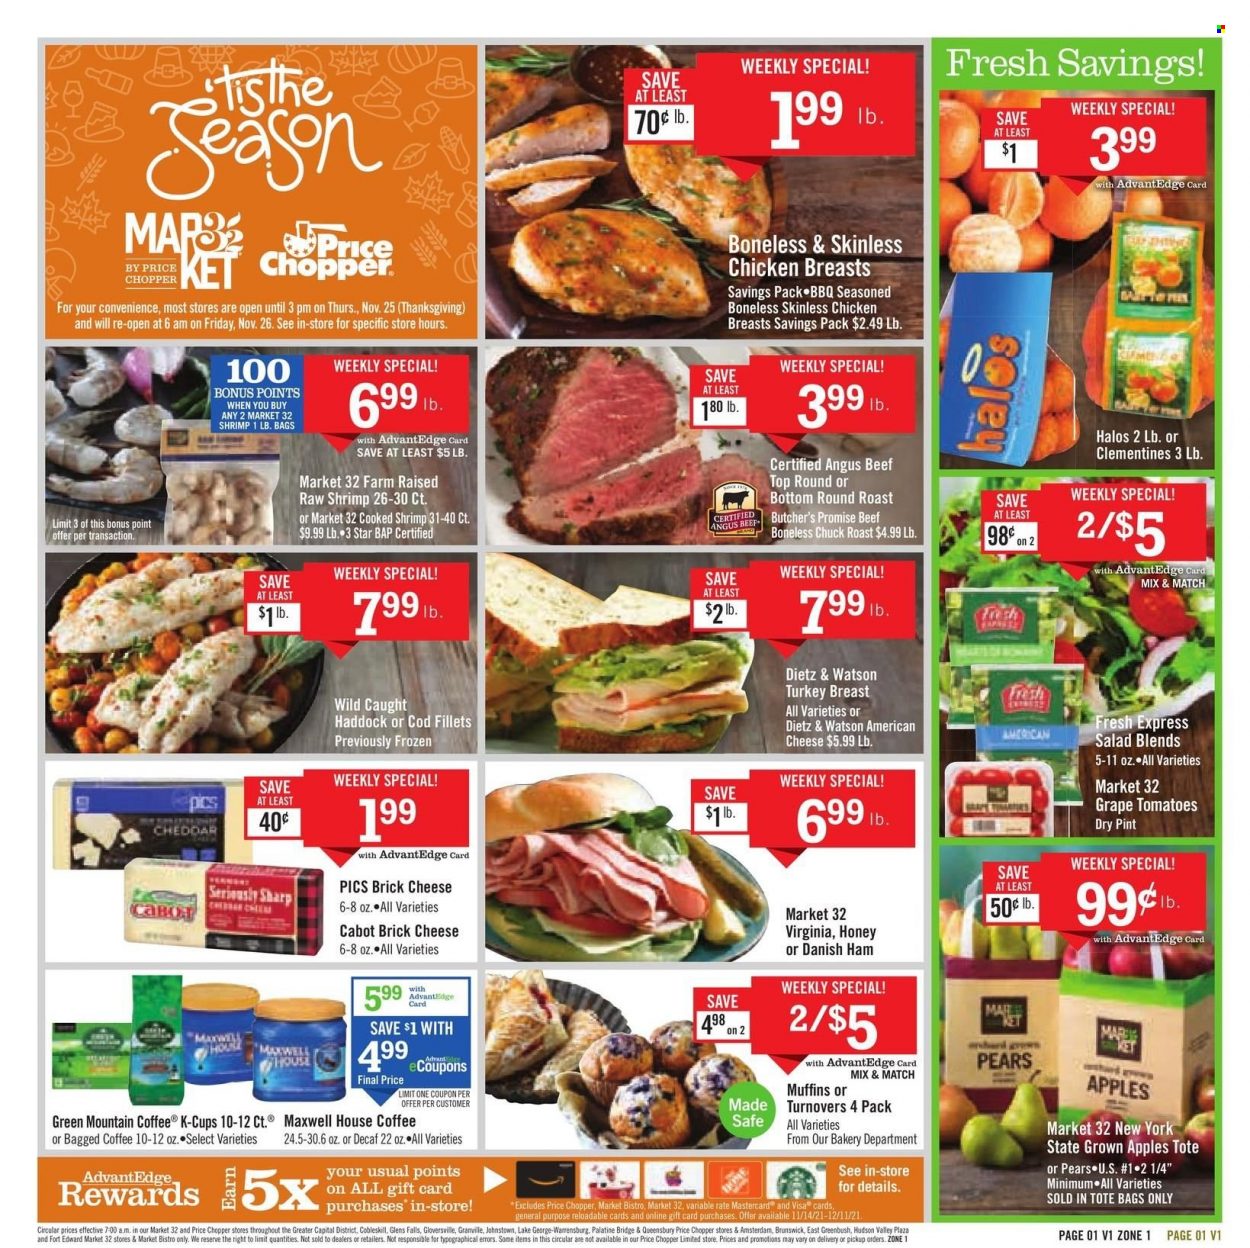 thumbnail - Price Chopper Flyer - 11/14/2021 - 11/20/2021 - Sales products - turnovers, muffin, tomatoes, salad, apples, pears, cod, haddock, shrimps, ham, Dietz & Watson, american cheese, brick cheese, cheddar, cheese, Maxwell House, coffee capsules, K-Cups, bagged coffee, Green Mountain, turkey breast, beef meat, round roast, chuck roast, clementines. Page 1.